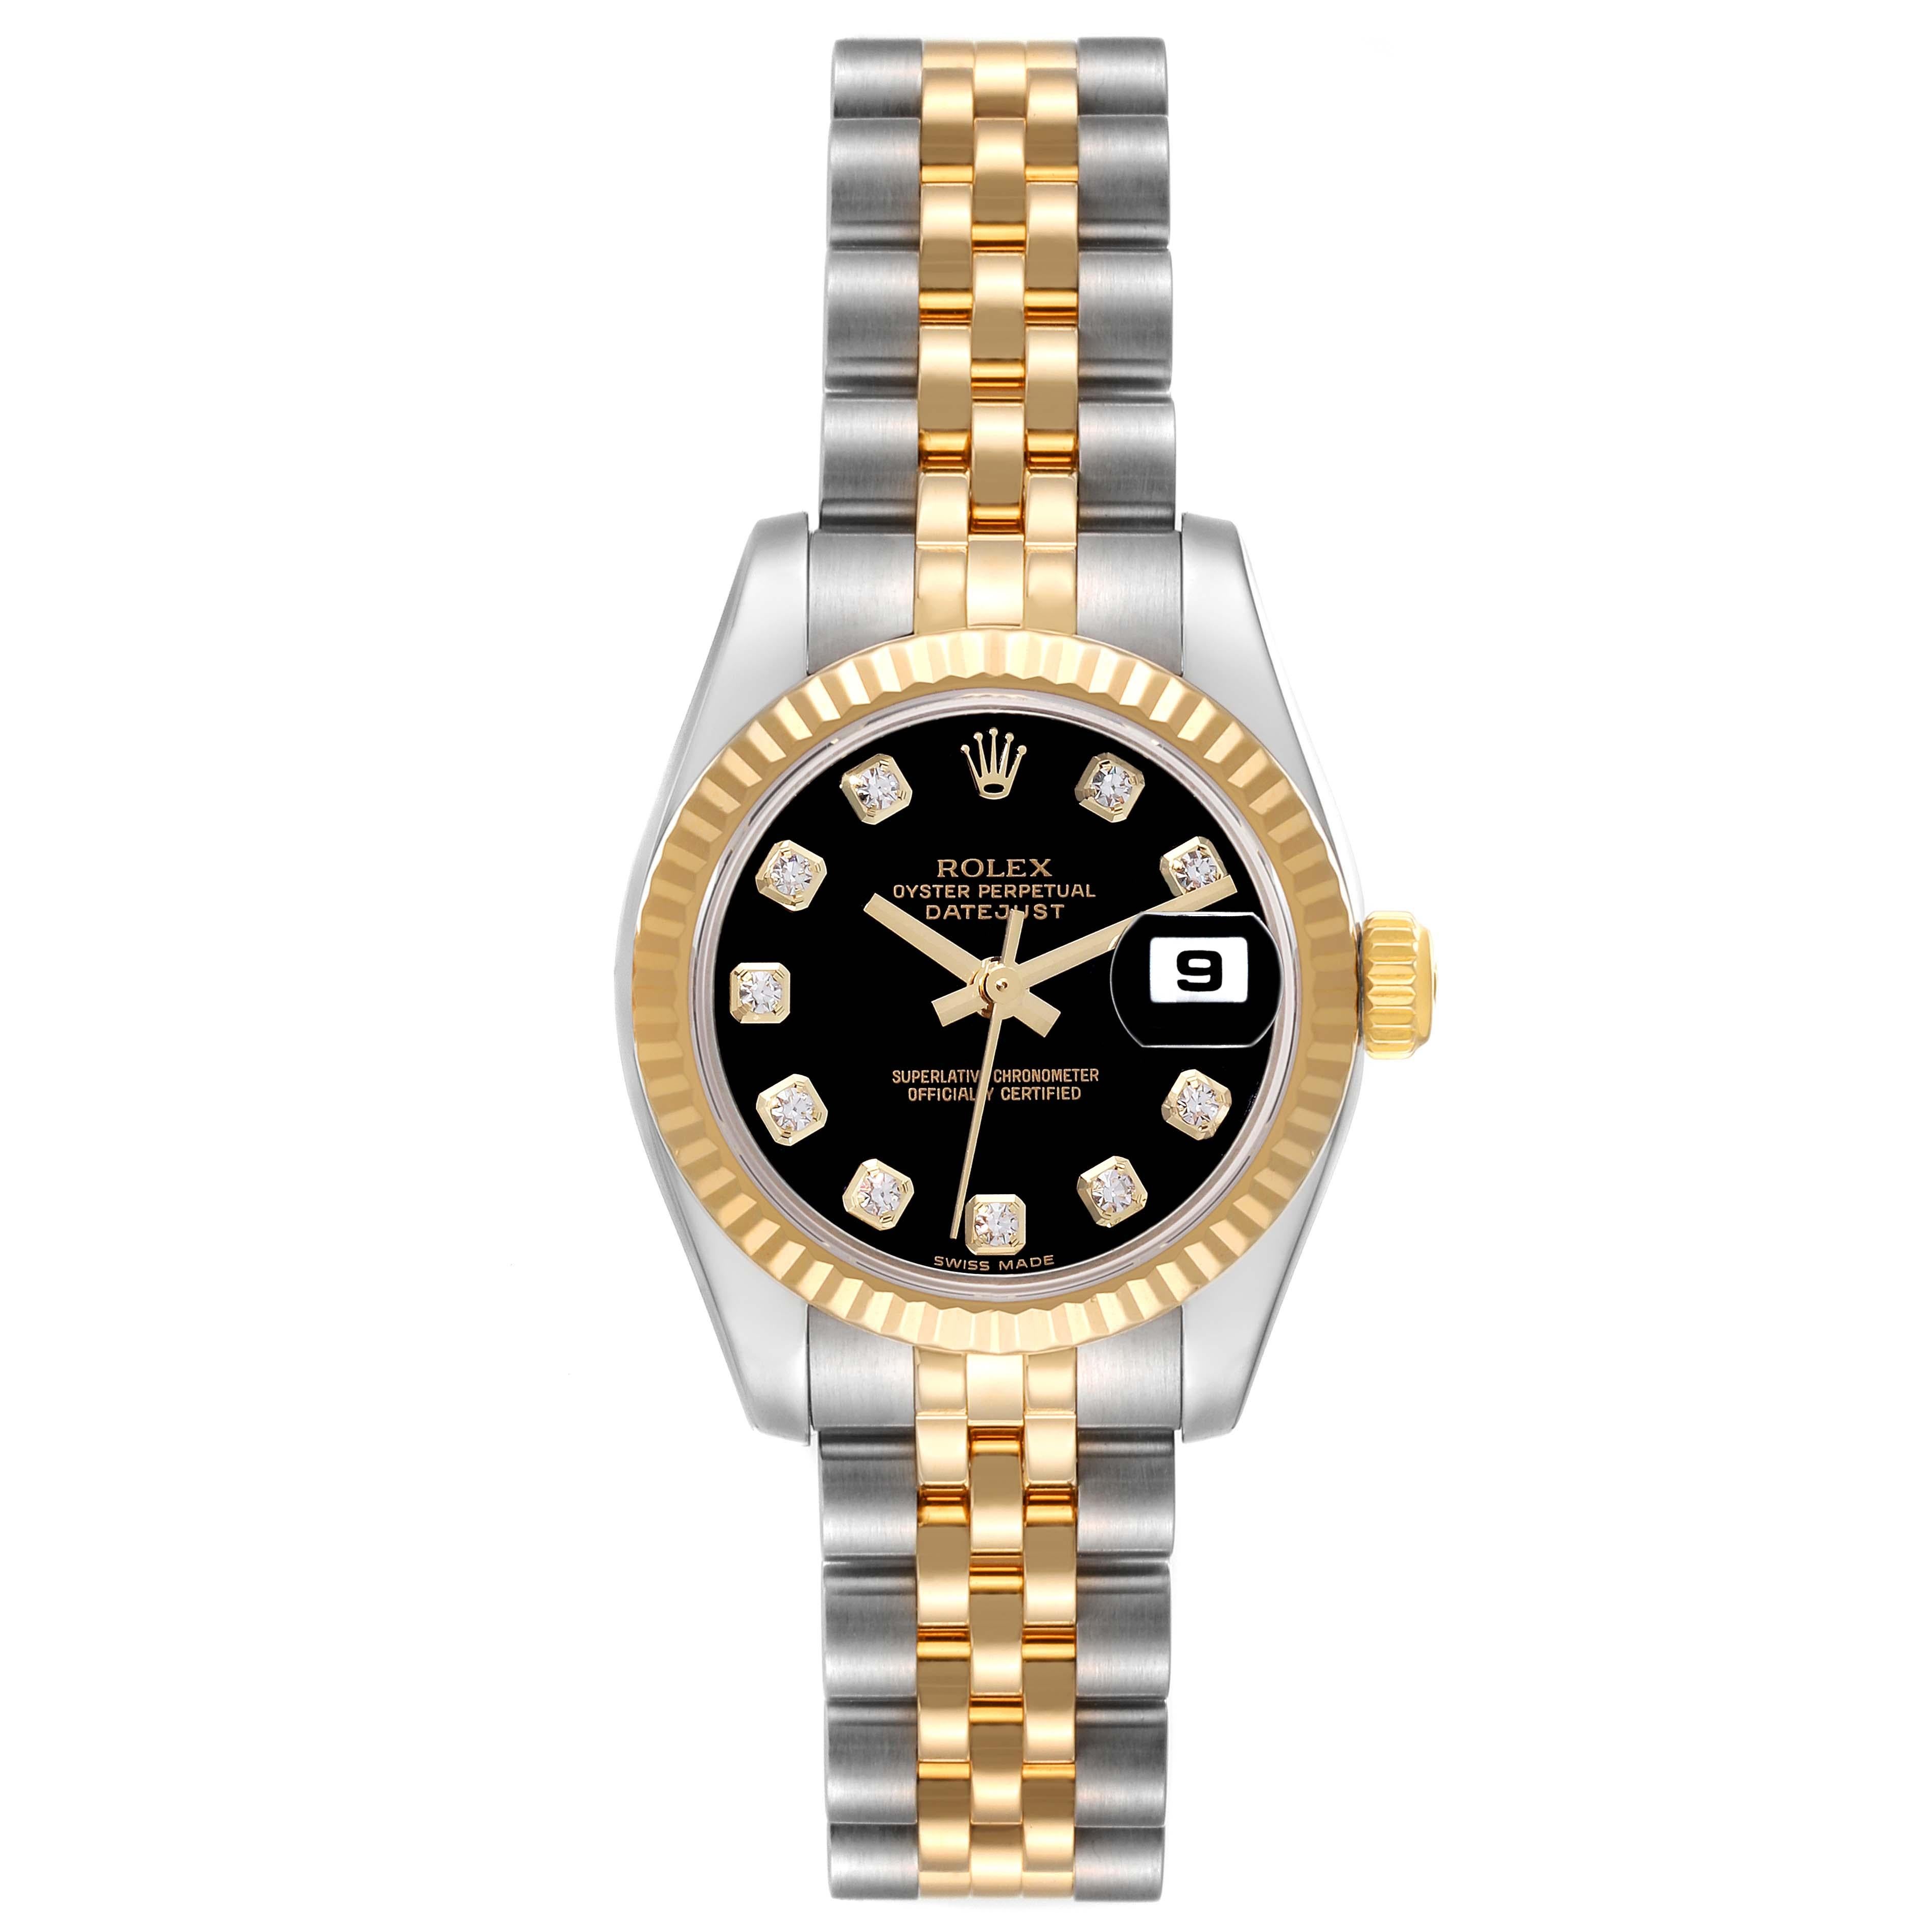 Rolex Datejust Diamond Dial Steel Yellow Gold Ladies Watch 179173 Box Card For Sale 6